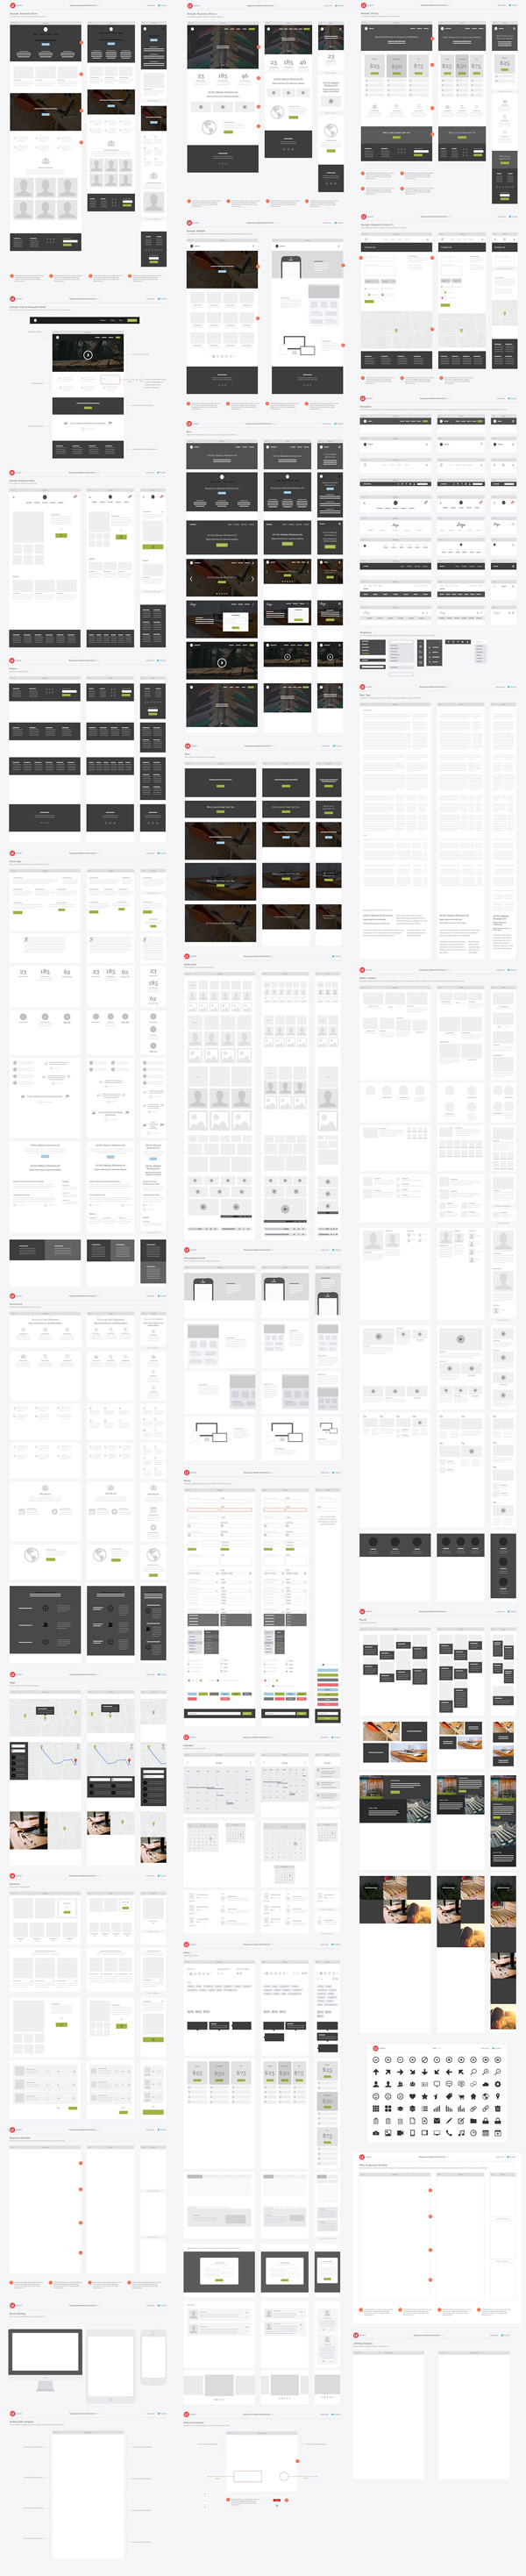 A responsive website wireframe kit developed by the team of UX Kits.